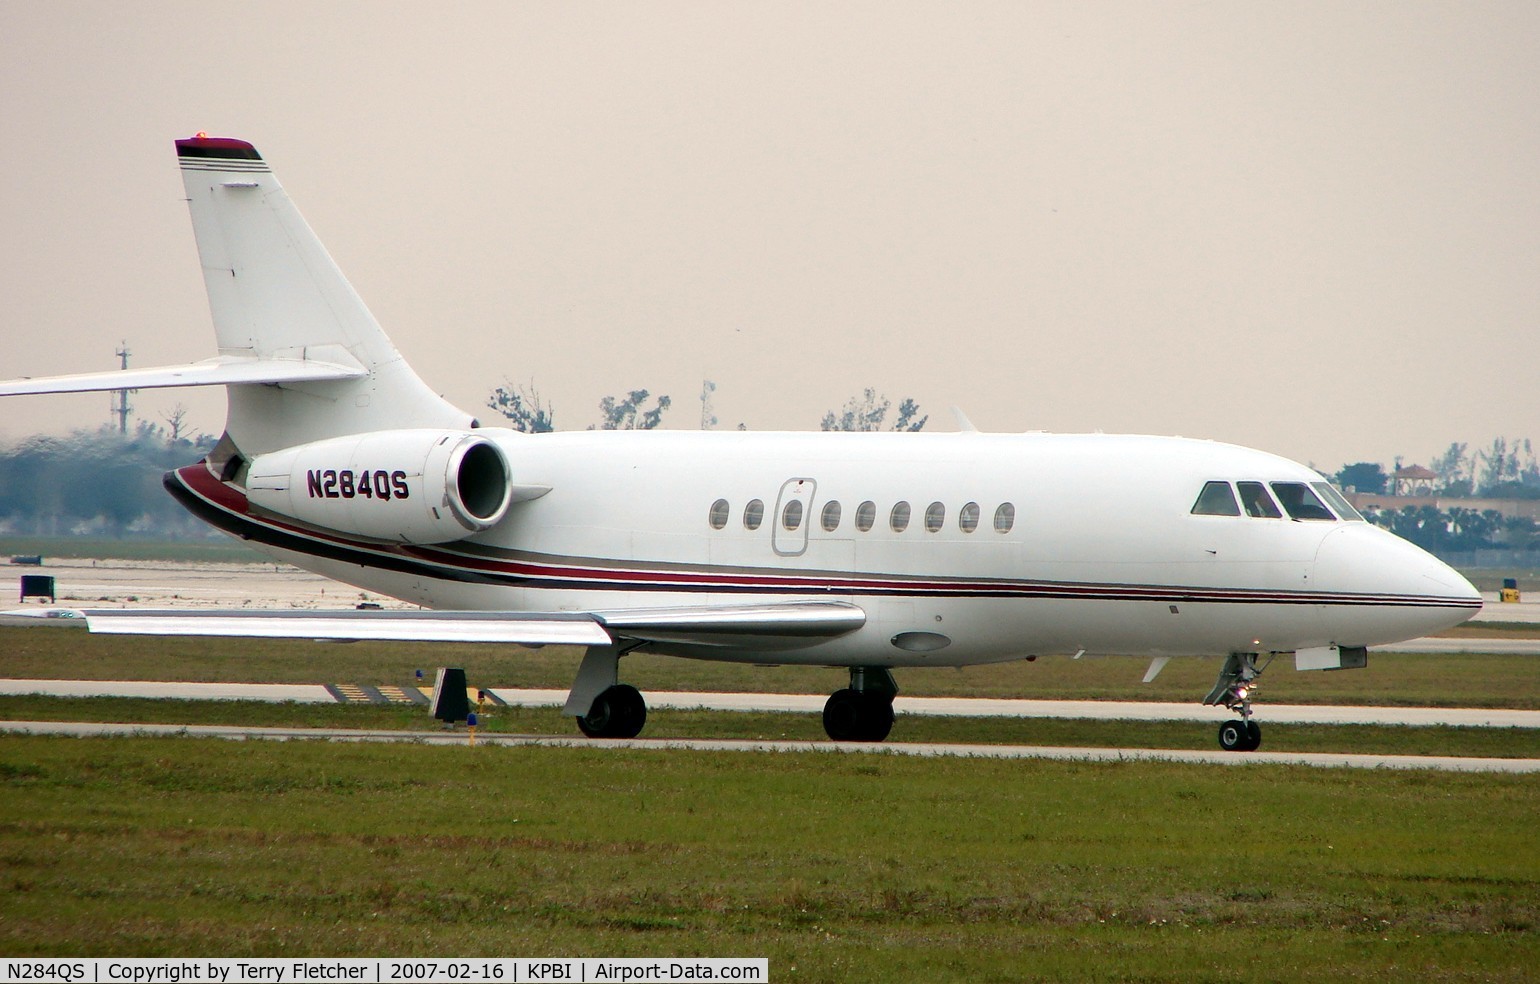 N284QS, 2002 Dassault Falcon 2000 C/N 185, part of the Friday afternoon arrivals 'rush' at PBI